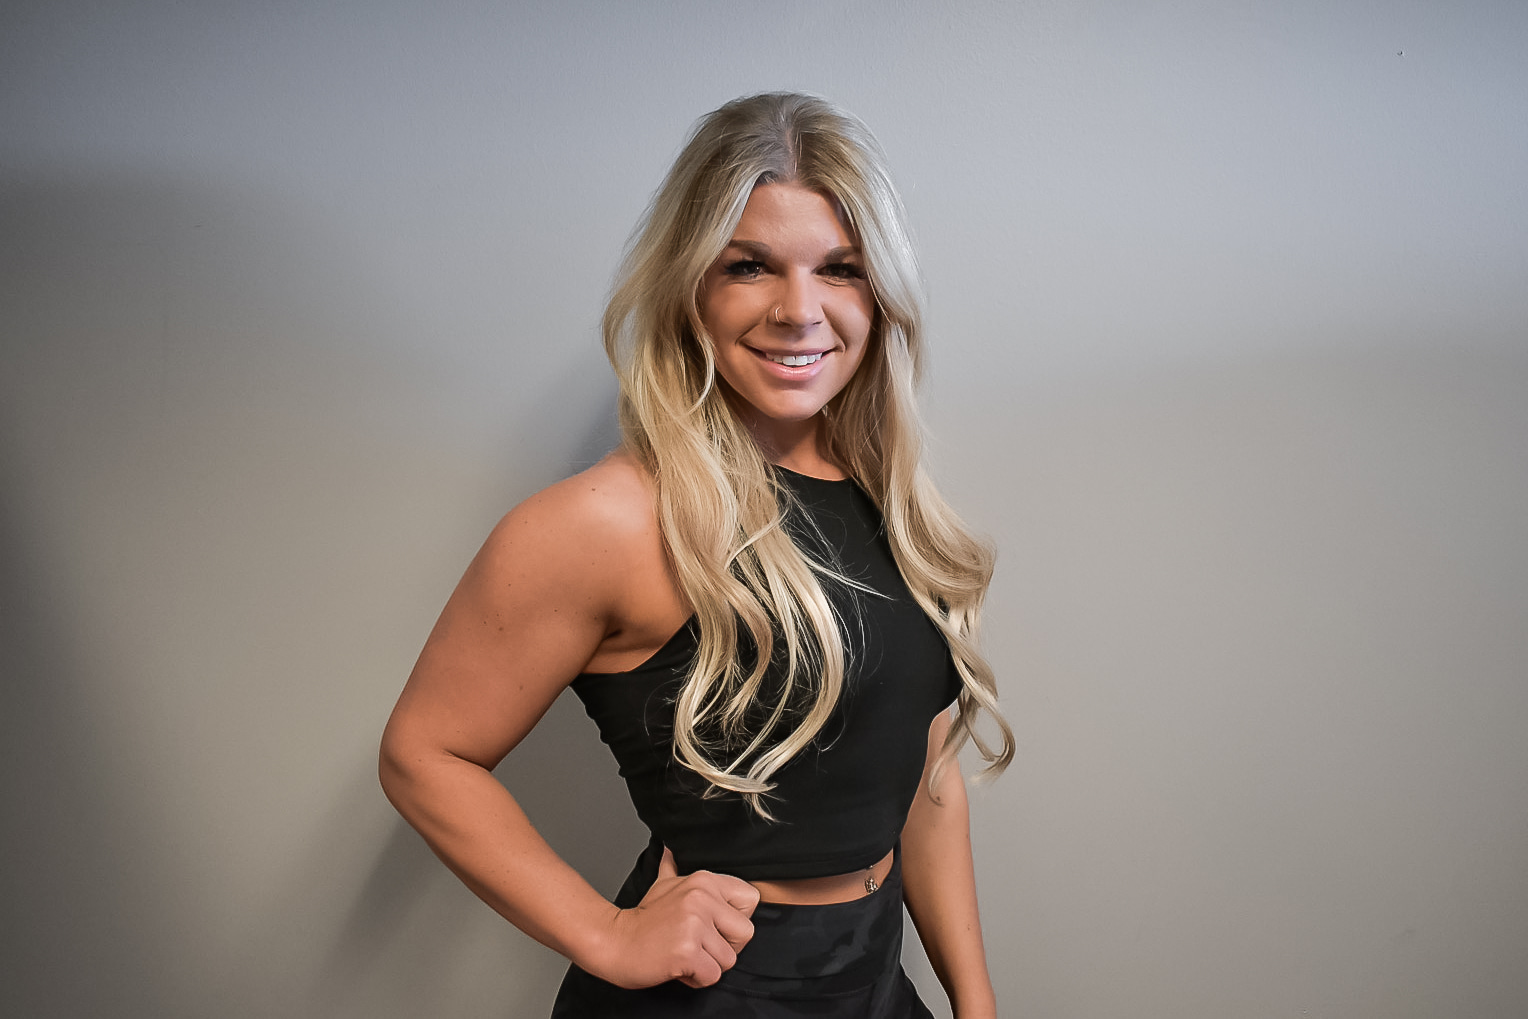 43fitness » Female Personal Trainer Serving Fort Collins, Laporte, Timnath,  Windsor, Loveland, Colorado and Surrounding Areas